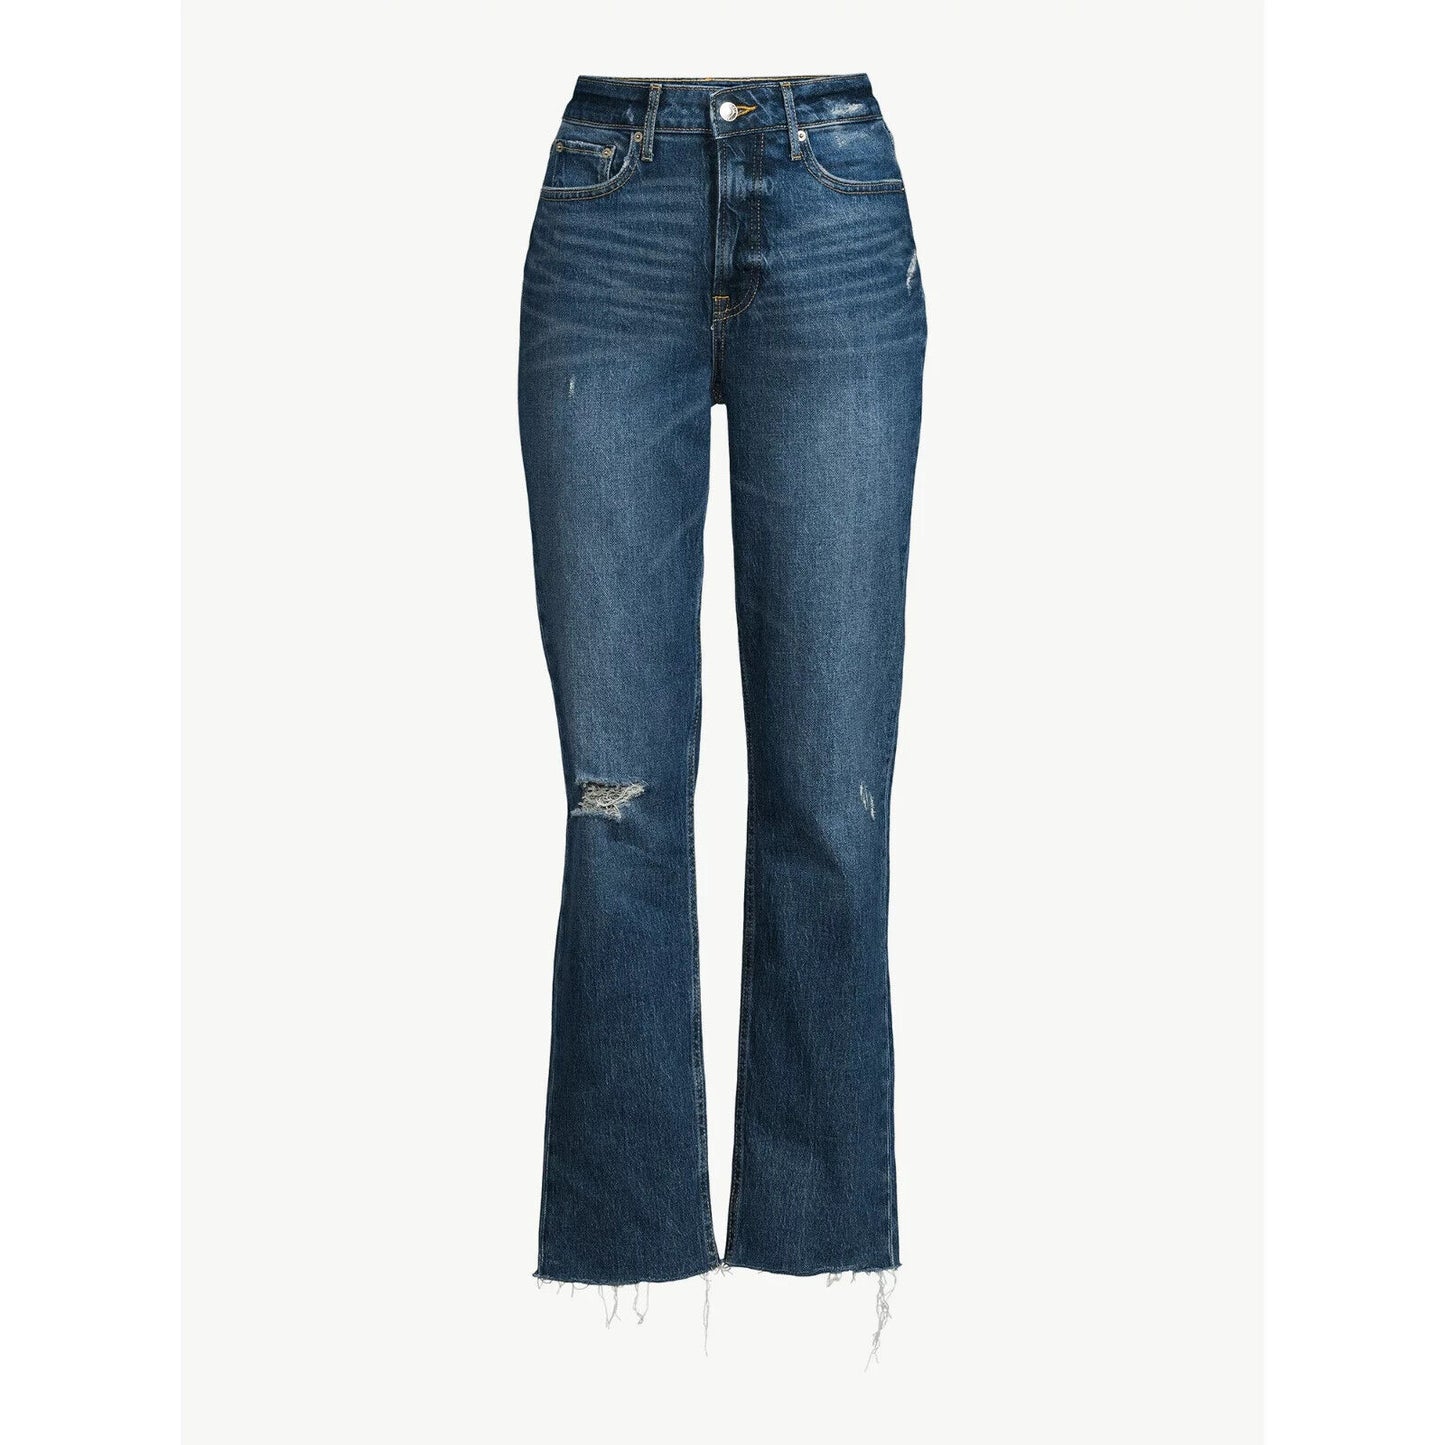 Free Assembly Women's Super High Rise Straight Jeans 14